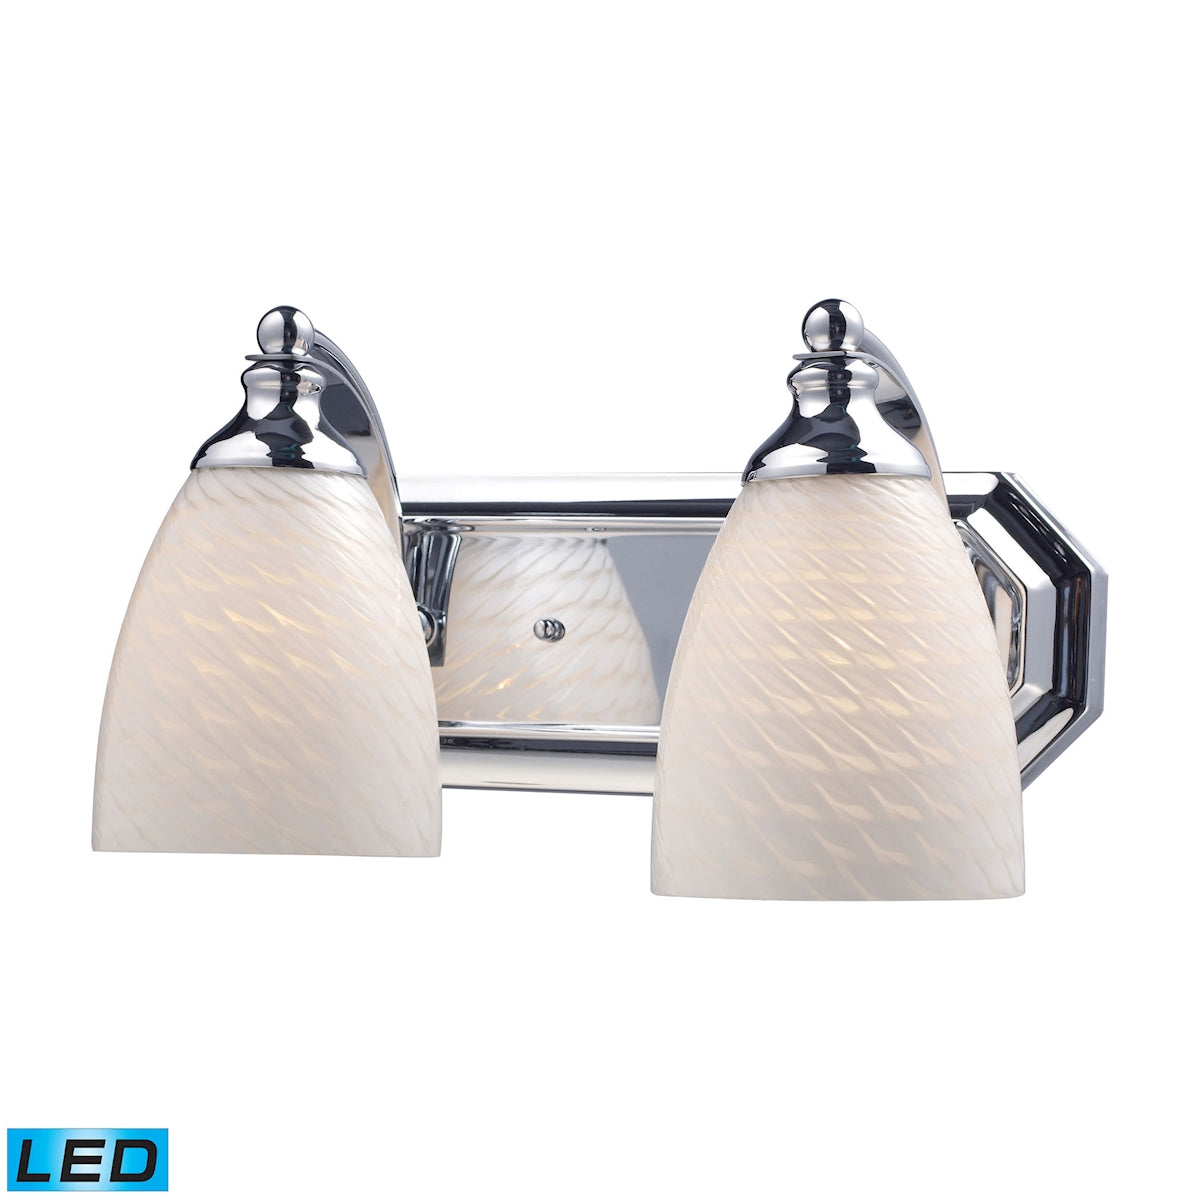 ELK Lighting 570-2C-WS-LED Mix and Match Vanity 2-Light Wall Lamp in Chrome with White Swirl Glass - Includes LED Bulbs